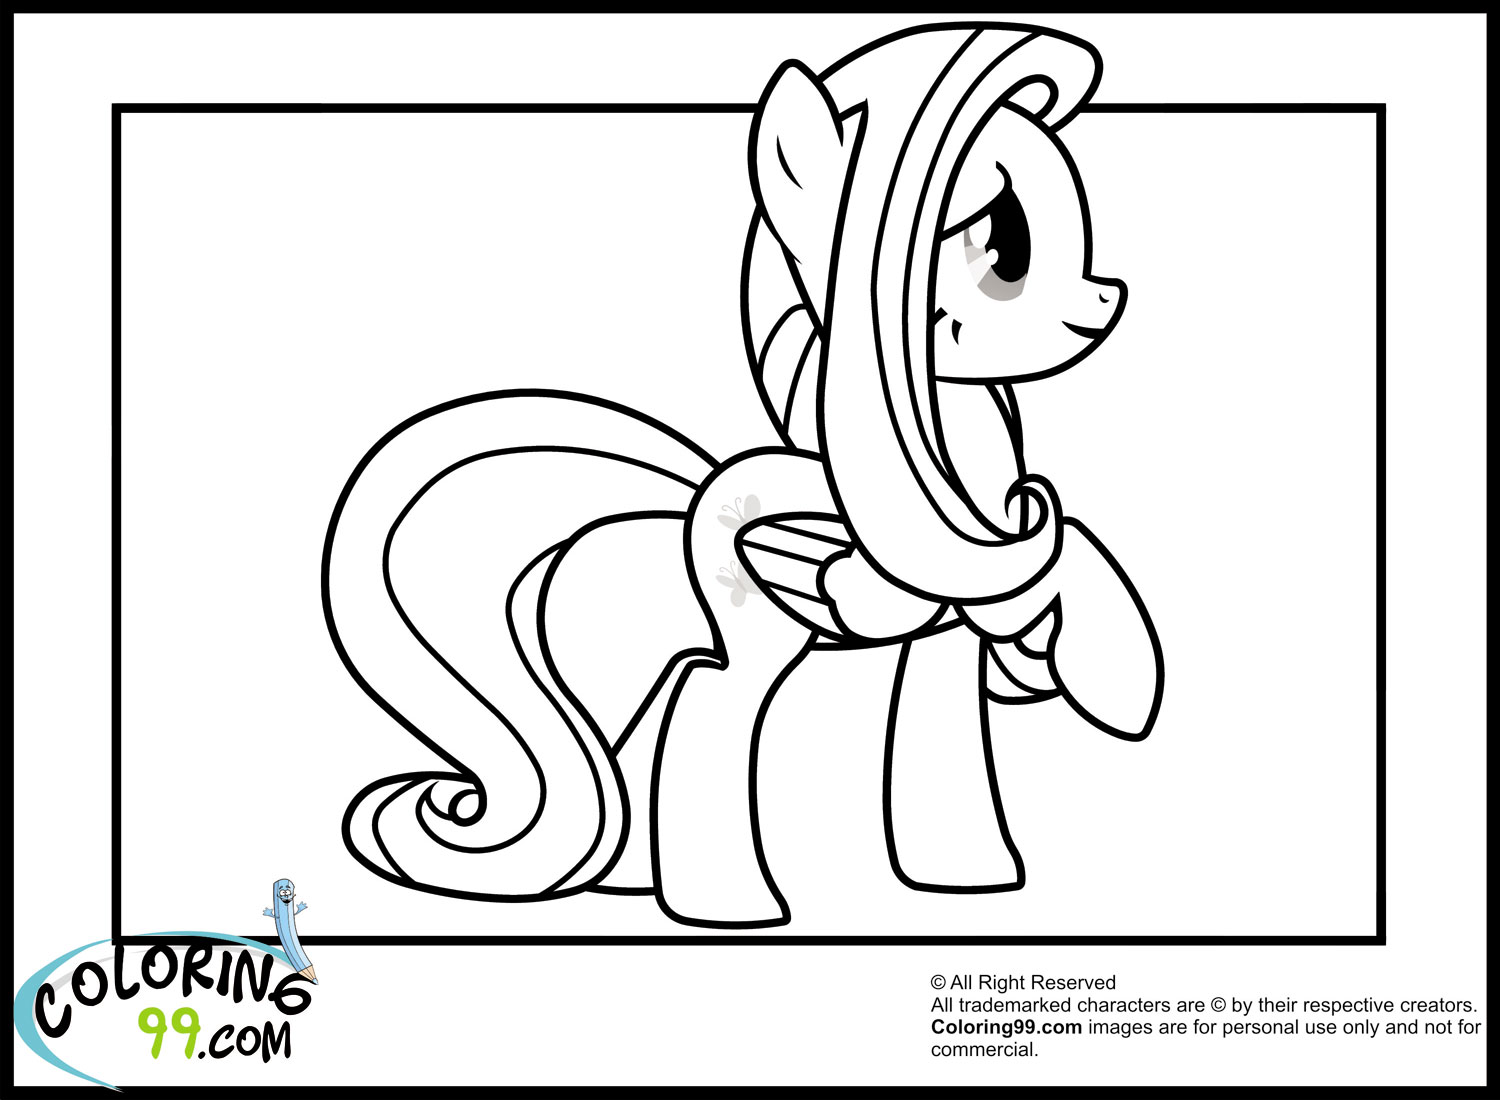 Download My Little Pony Fluttershy Coloring Pages | Team colors